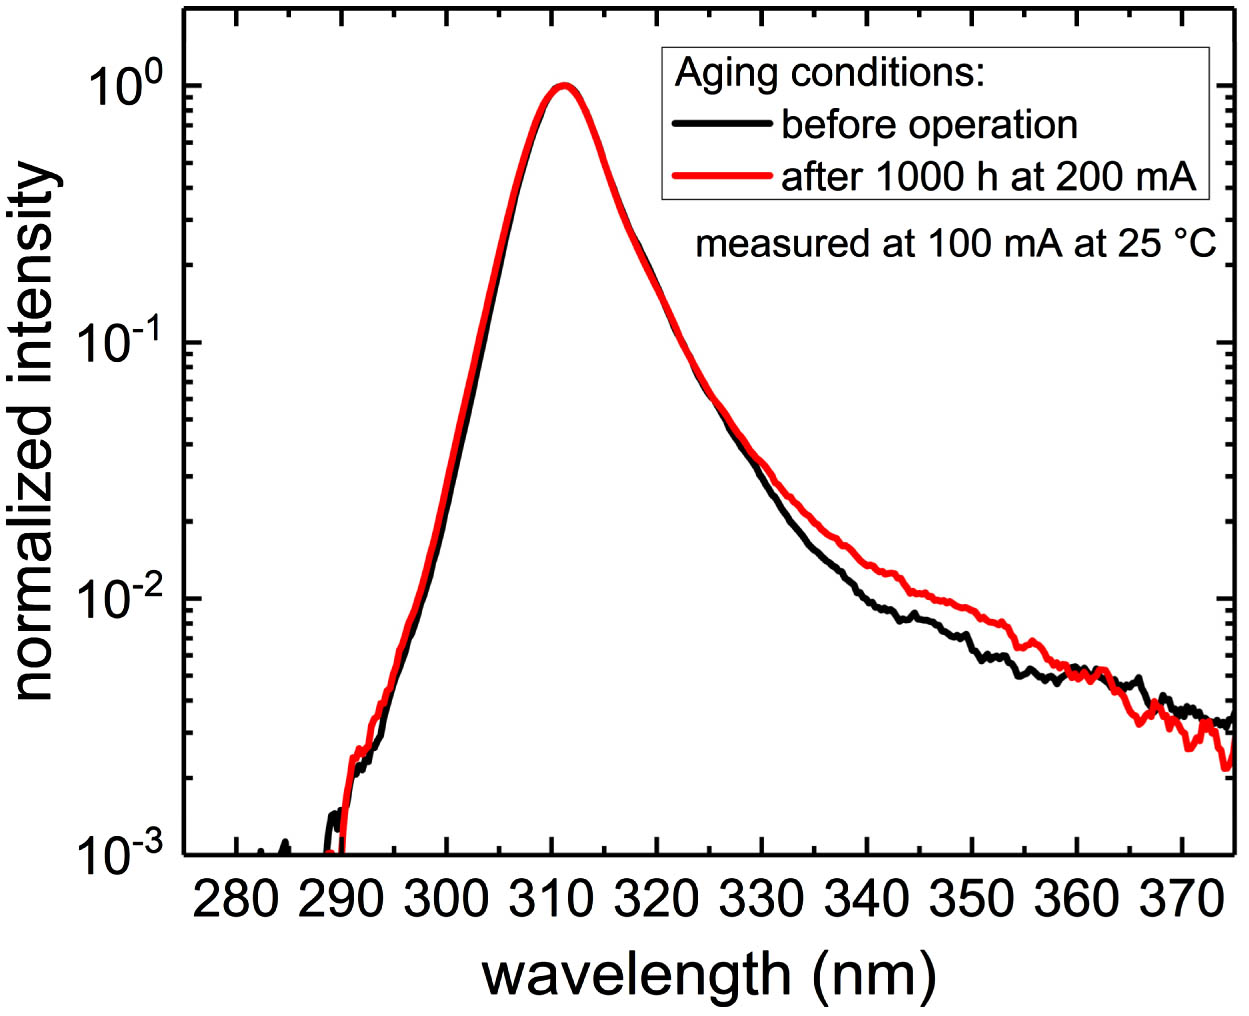 Representative emission spectra of the investigated 310 nm UV LEDs normalized to the emission peak. The spectra were measured at 100 mA at a heat sink temperature of 25°C before aging and after aging experiment 3 (Table 1).